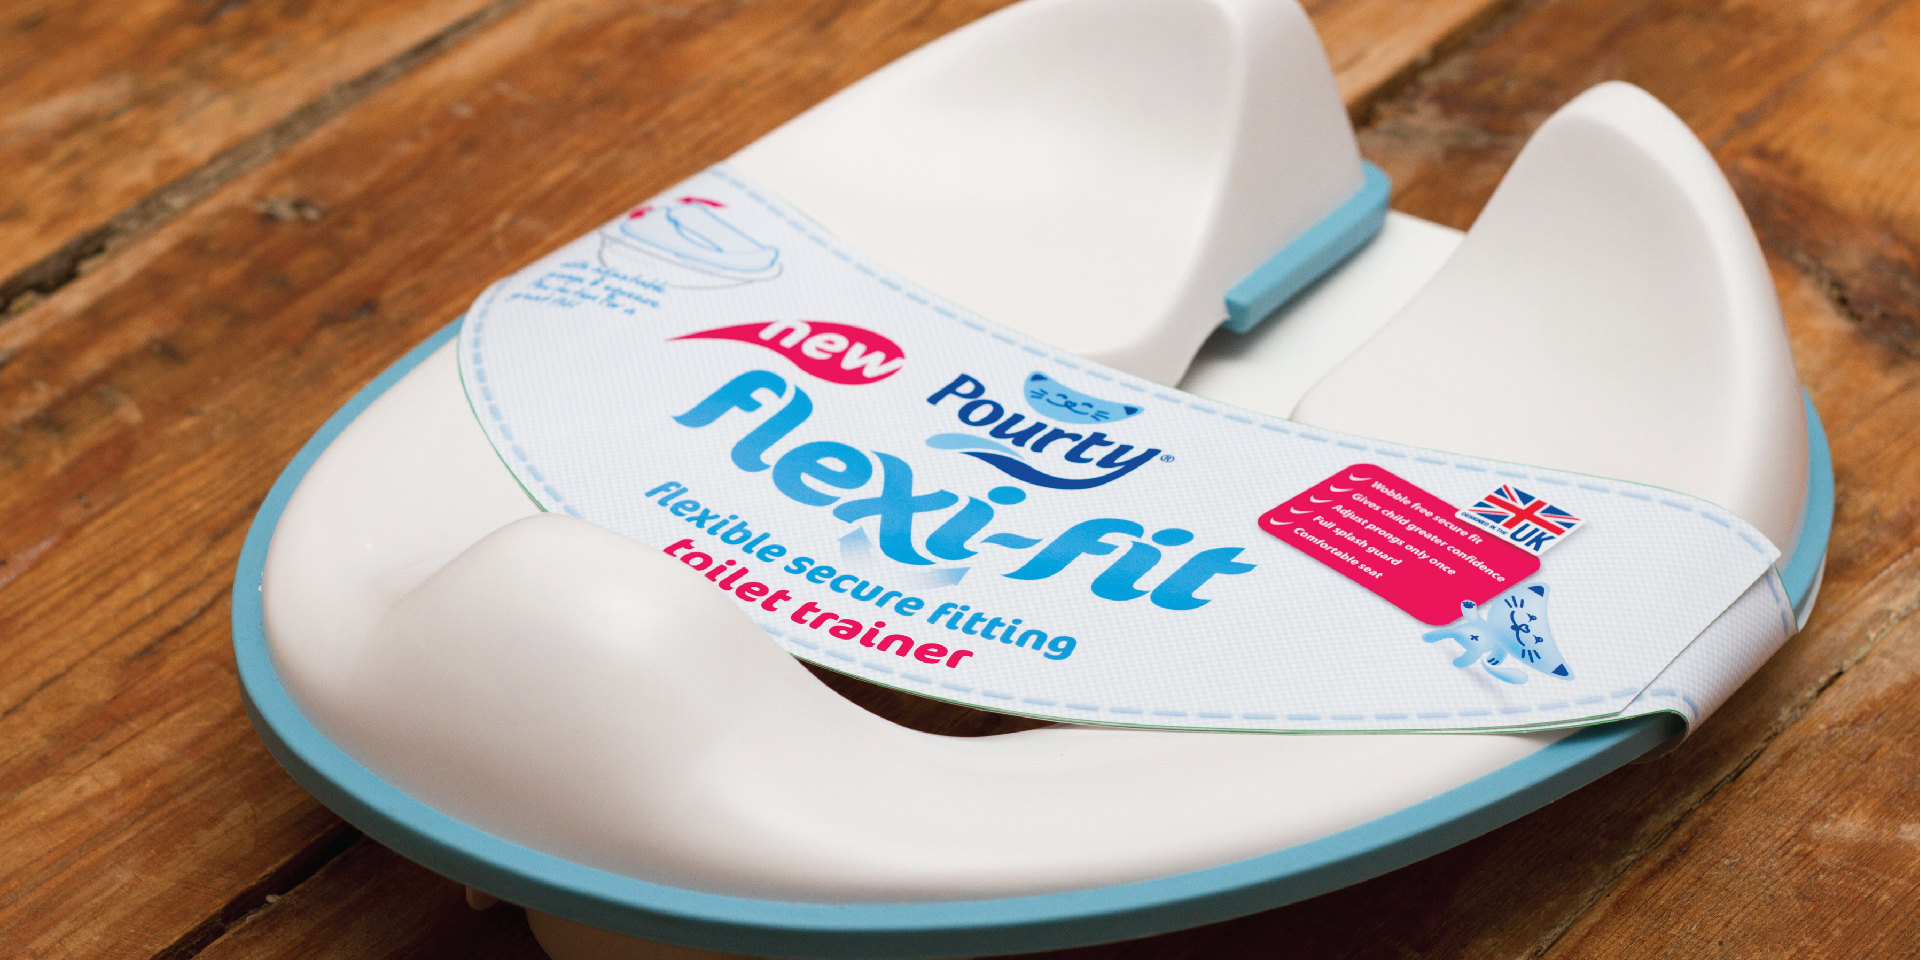 Pourty Flexi-Fit toilet seat for children packaging design